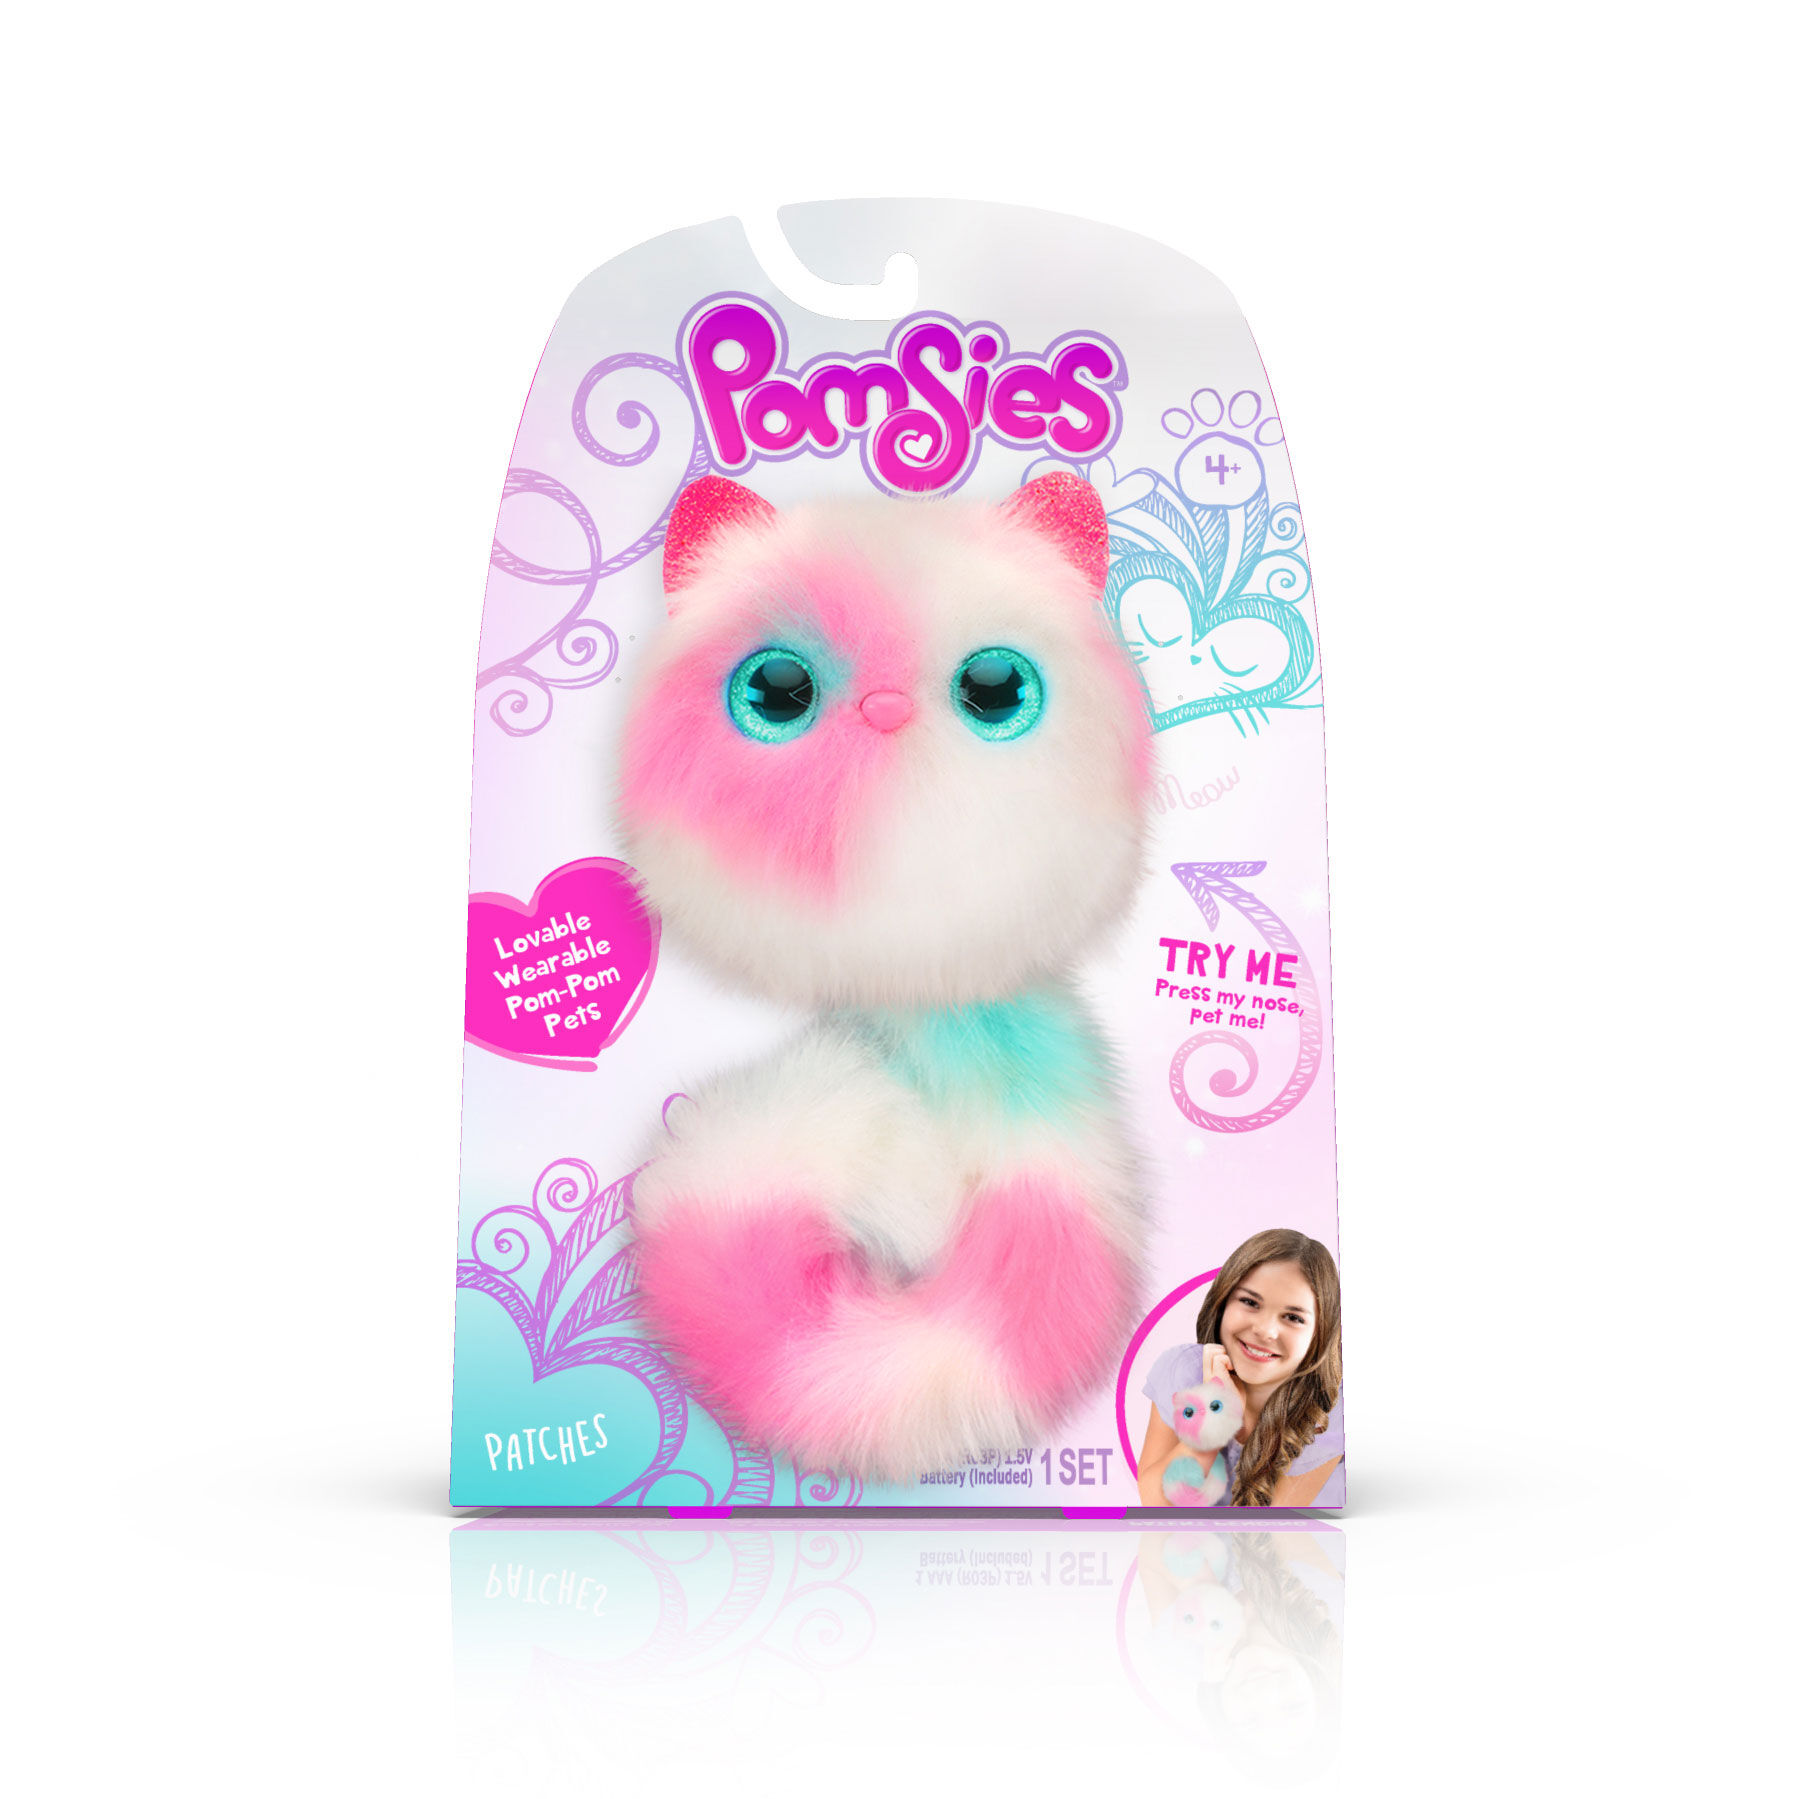 Pomsies Pet - Patches | Toys R Us Canada